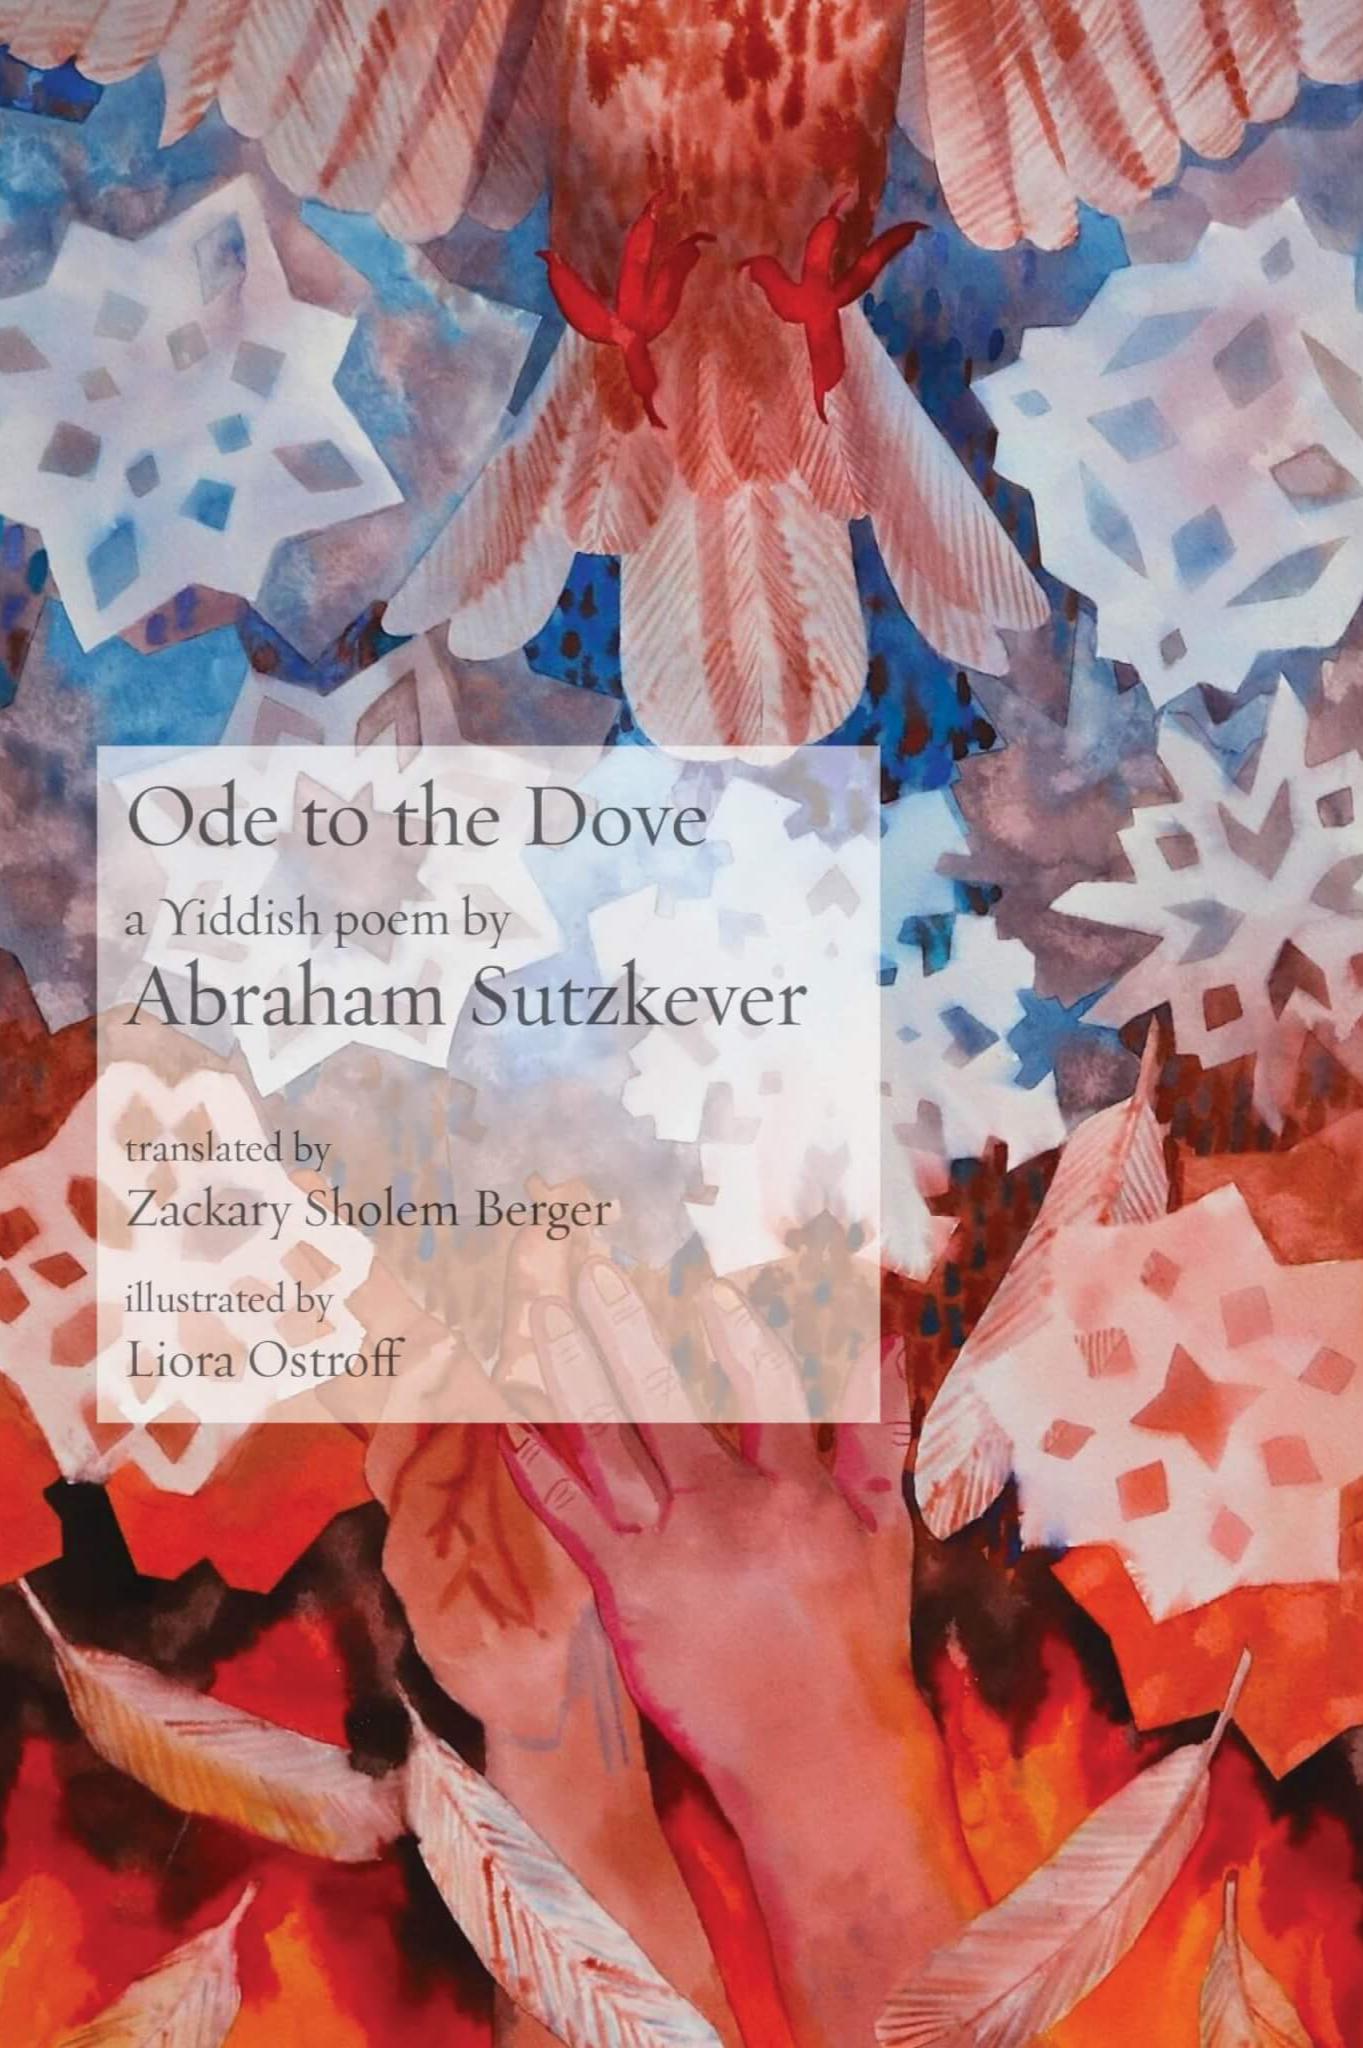 Book cover of Ode to the Dove: A Yiddish poem by Abraham Sutzkever, by Zackary Sholem Berger, translator, and Liora Ostroff, Illustrator by Zackary Sholem Berger